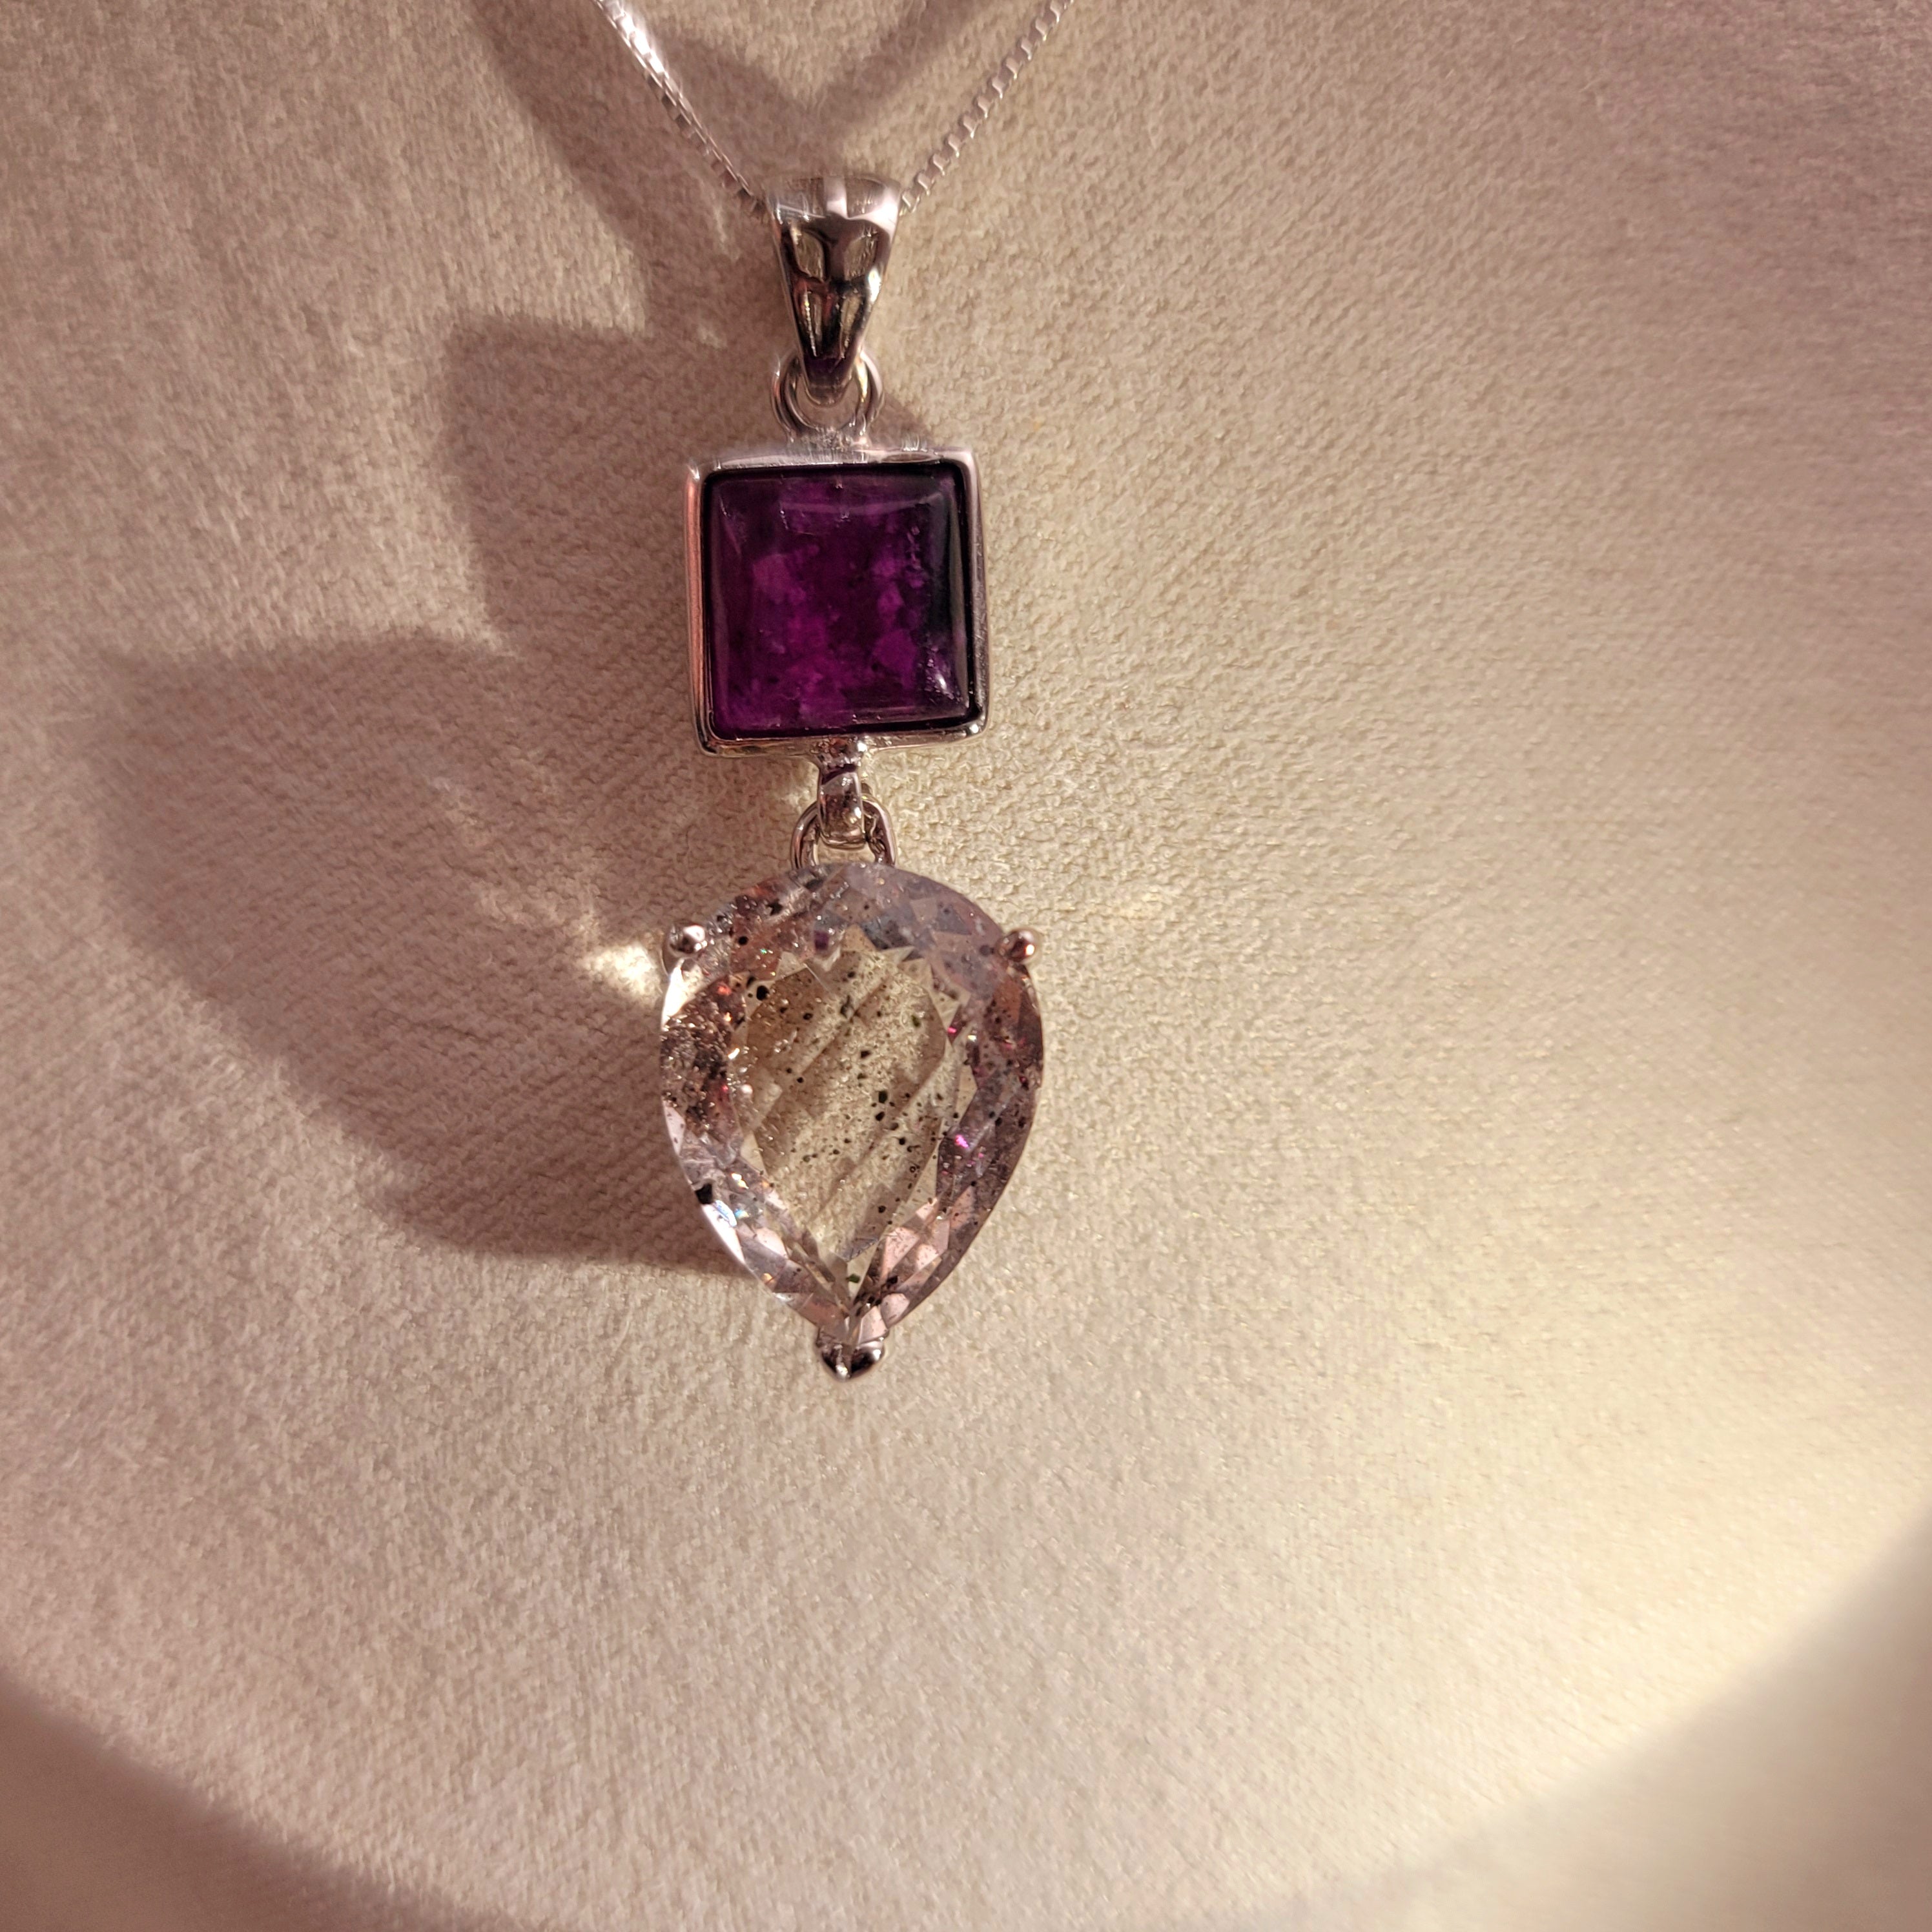 Pink Fire Covellite in Quartz And Sugilite .925 Silver Necklace for Spiritual Evolution and Energy Flow